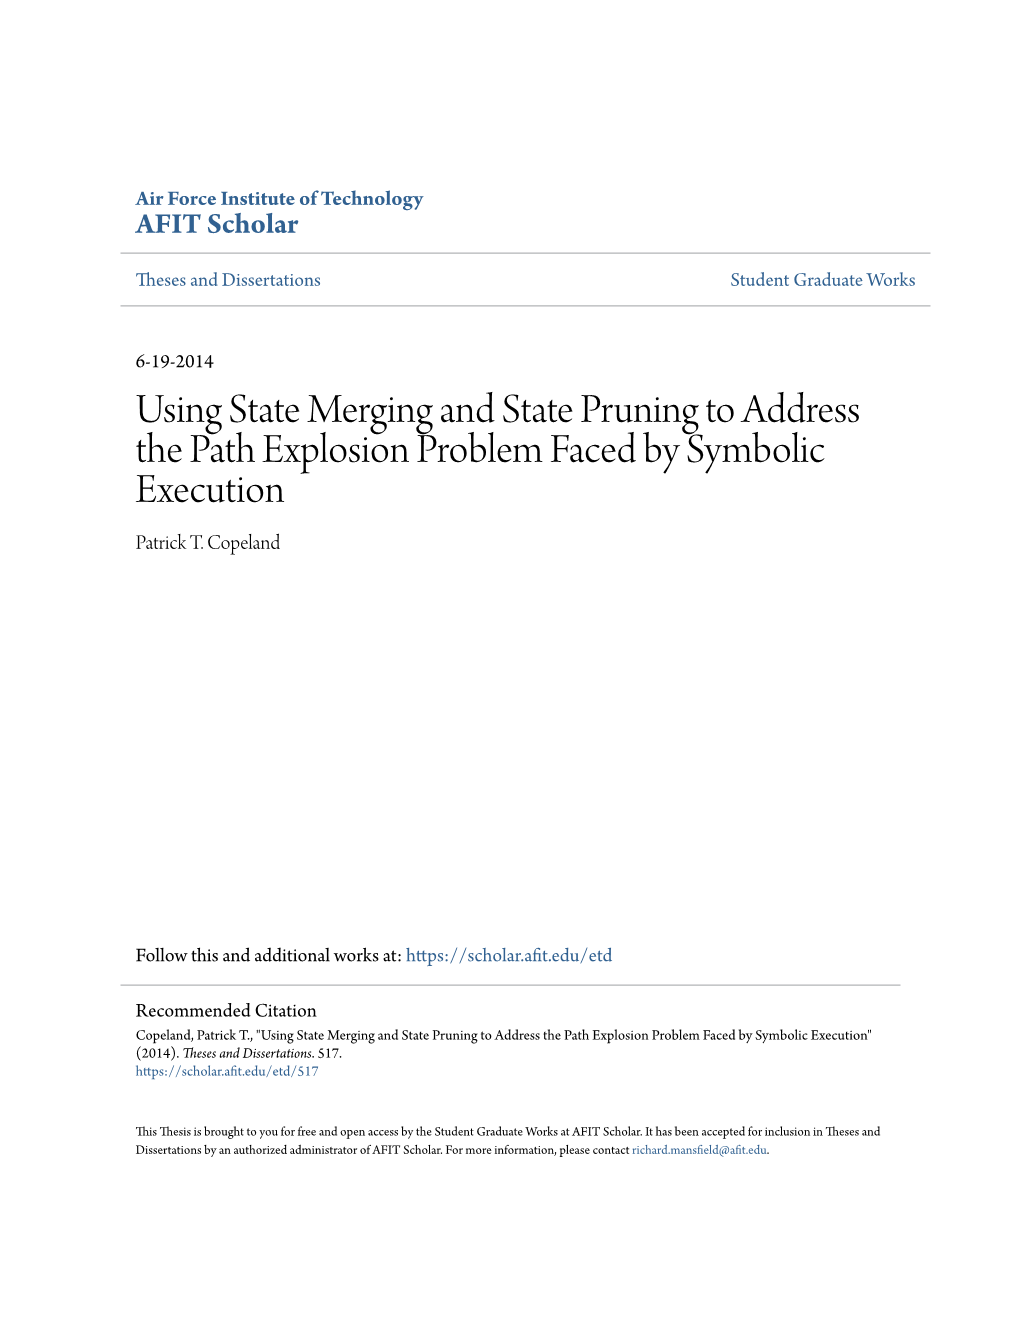 Using State Merging and State Pruning to Address the Path Explosion Problem Faced by Symbolic Execution Patrick T